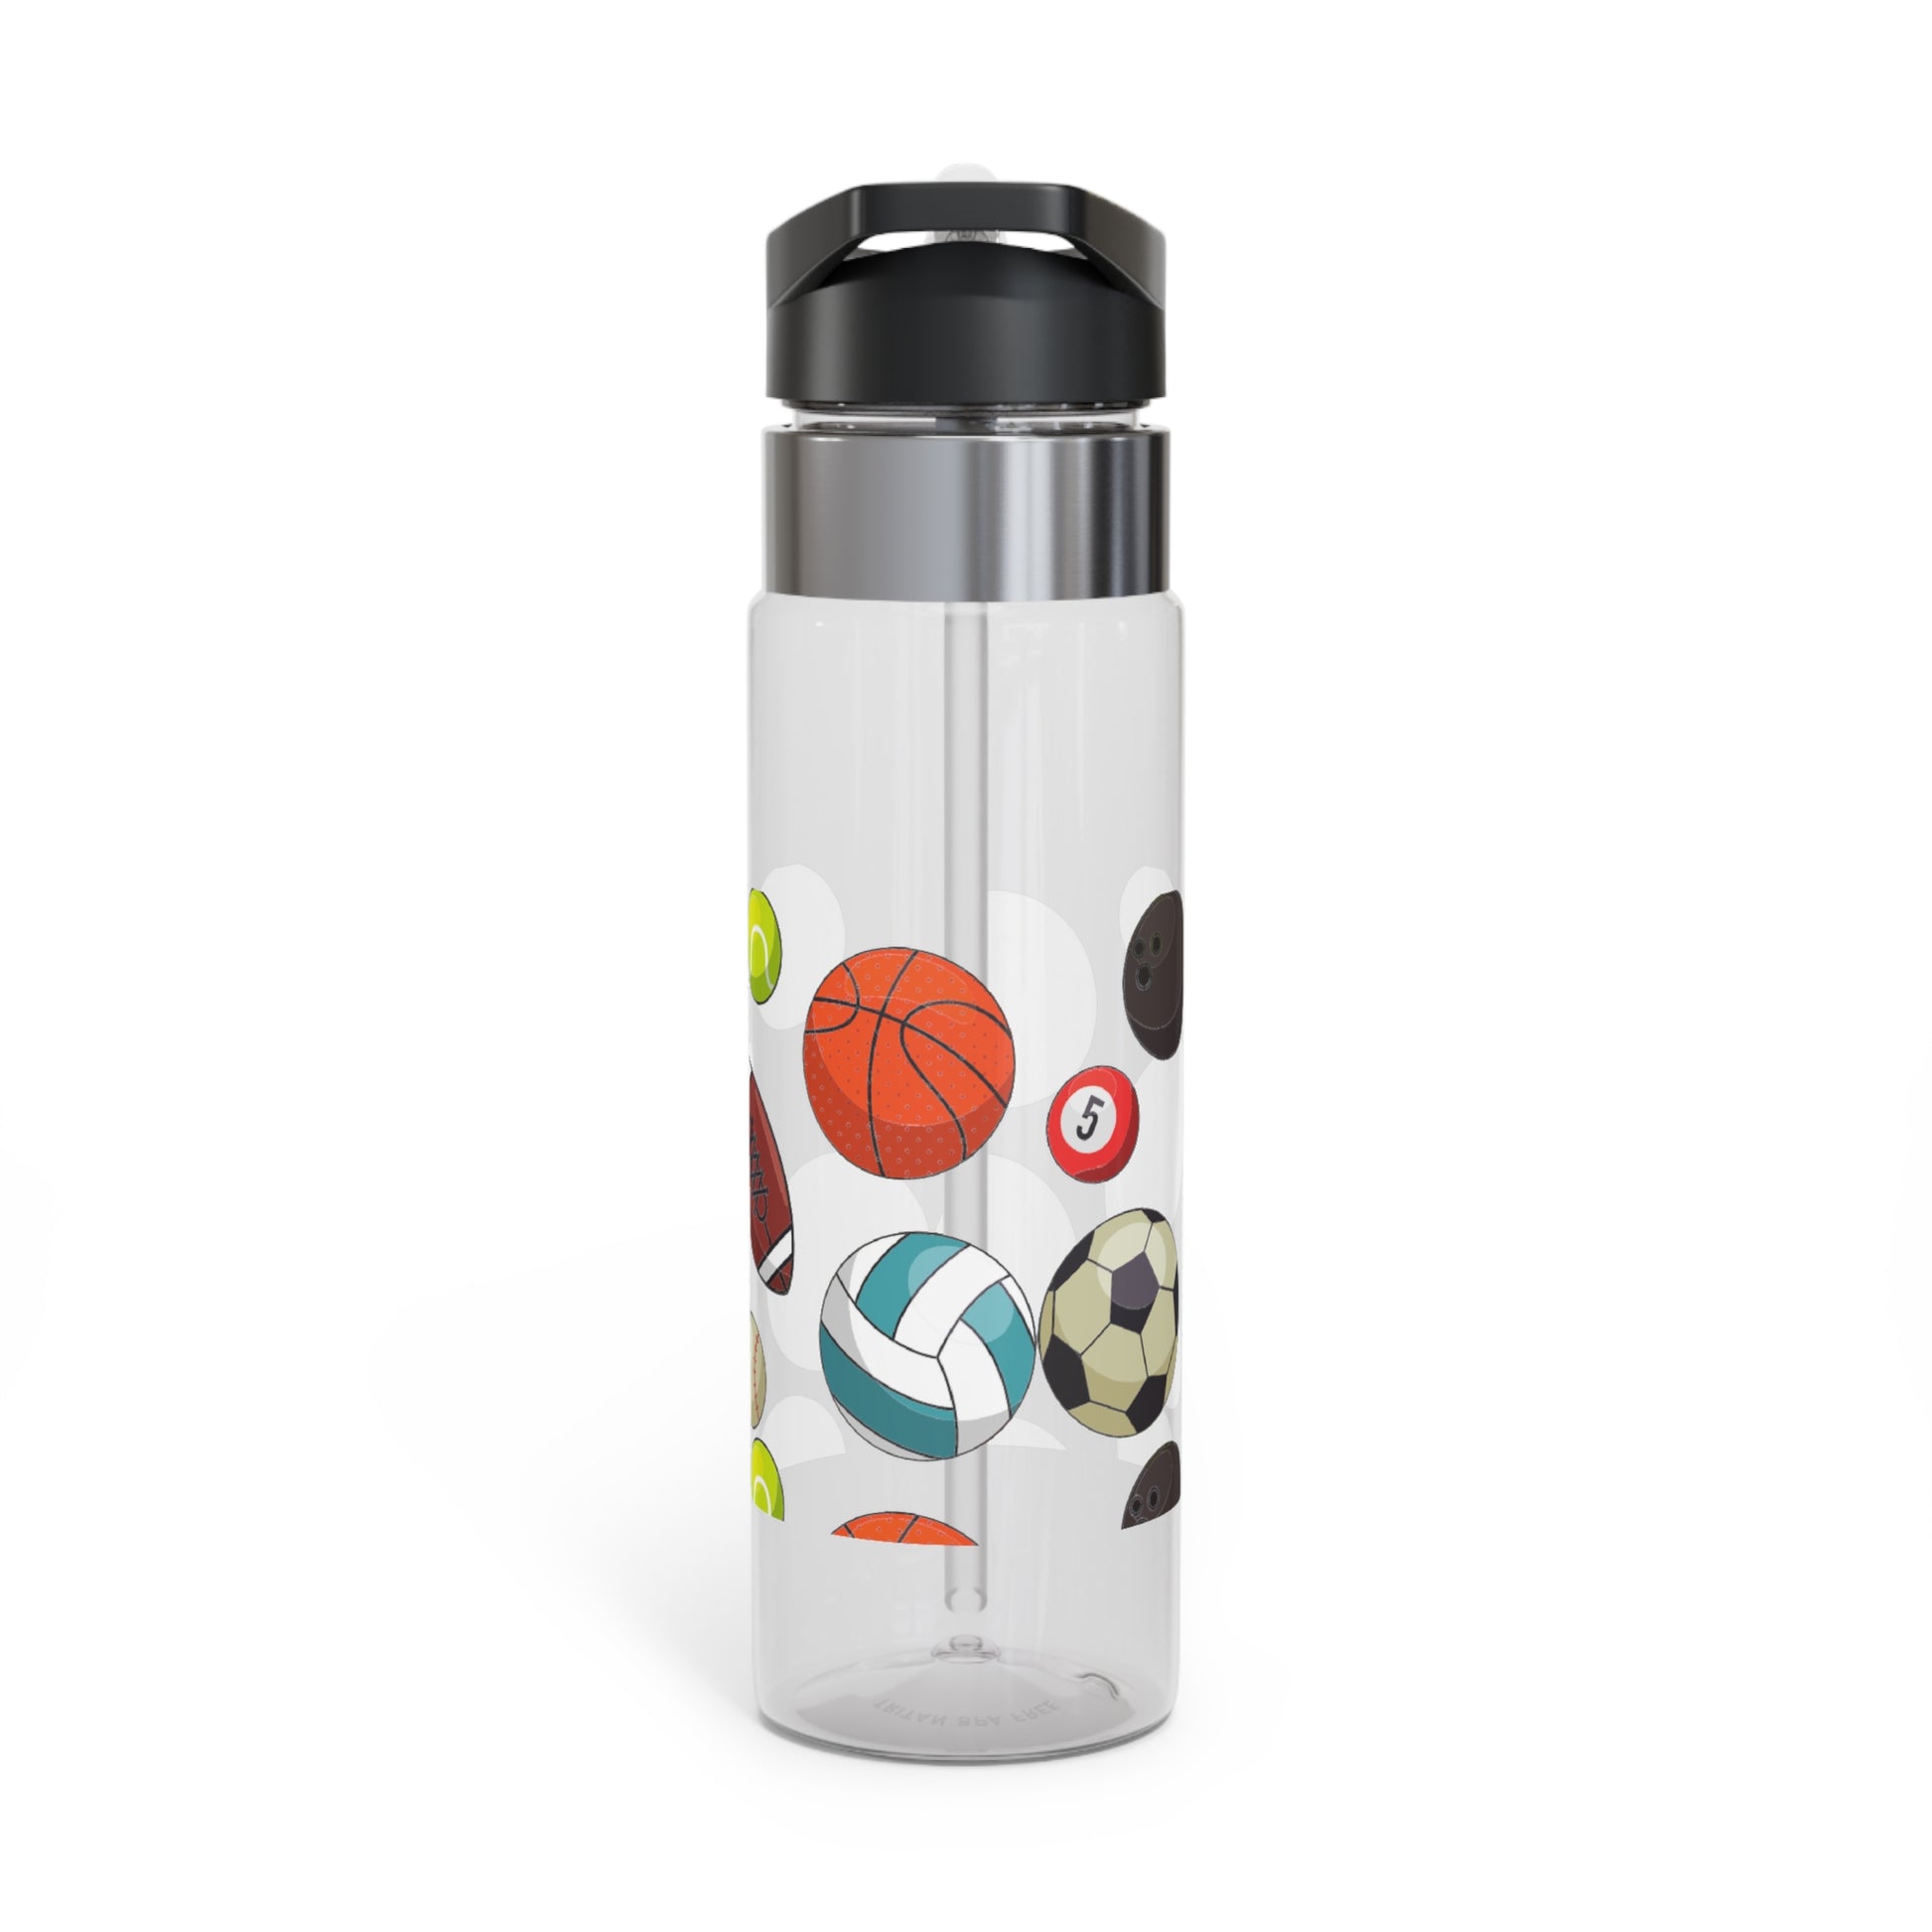 A clear, BPA-free Sports Fan Water Bottle with various sports balls on it, perfect for any sports fan.